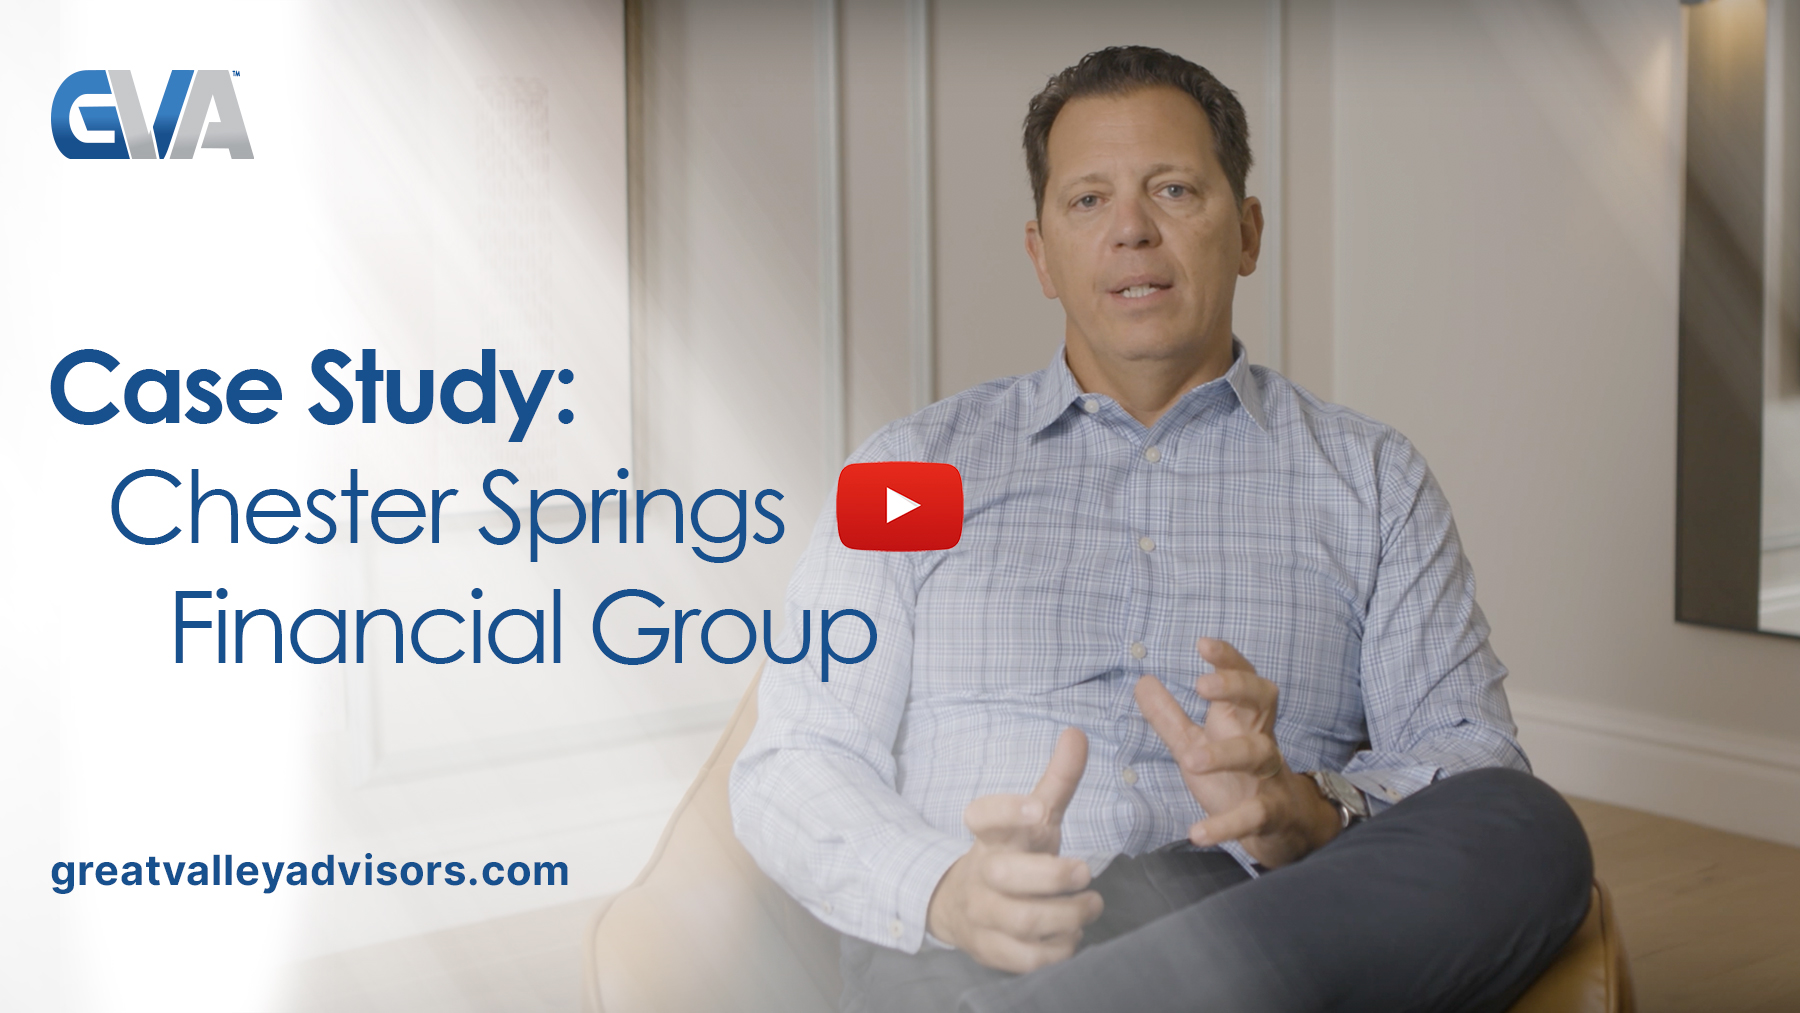 Case Study: Chester Springs Financial Group